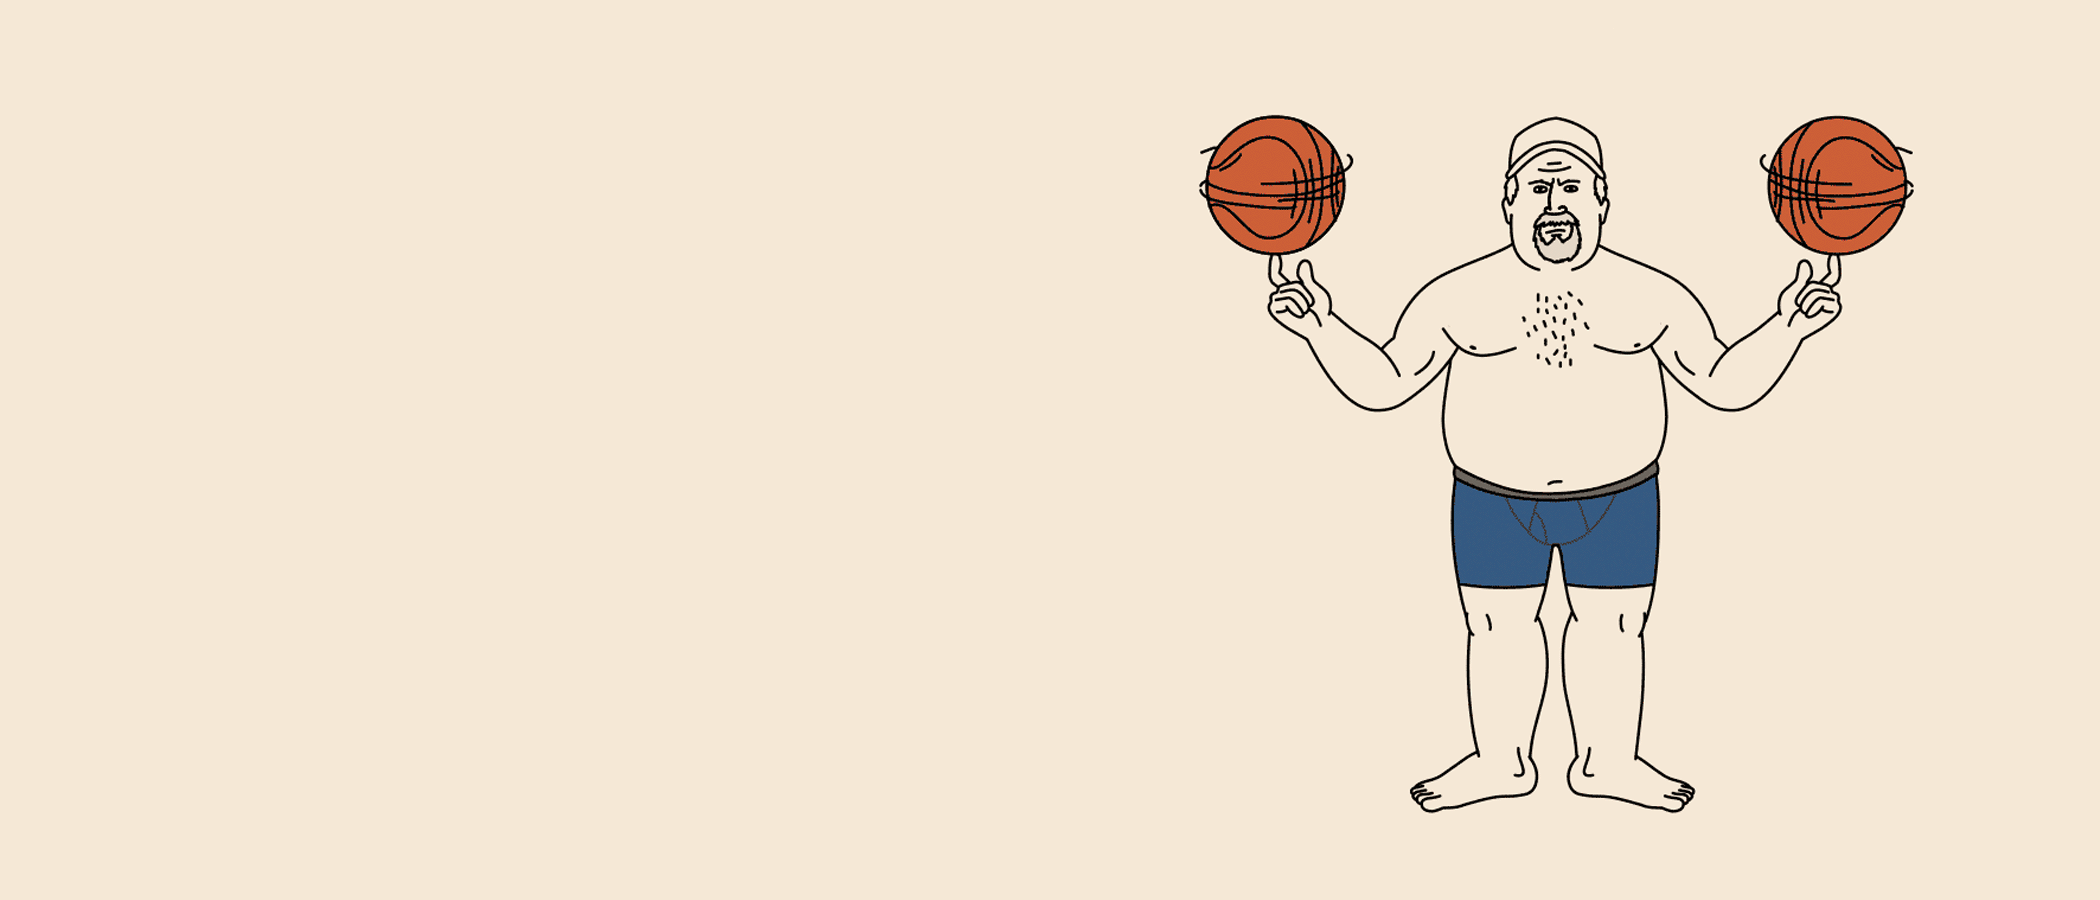 An animated line drawing of a man in Buck Naked boxer briefs does some fancy ball handling with two basket balls